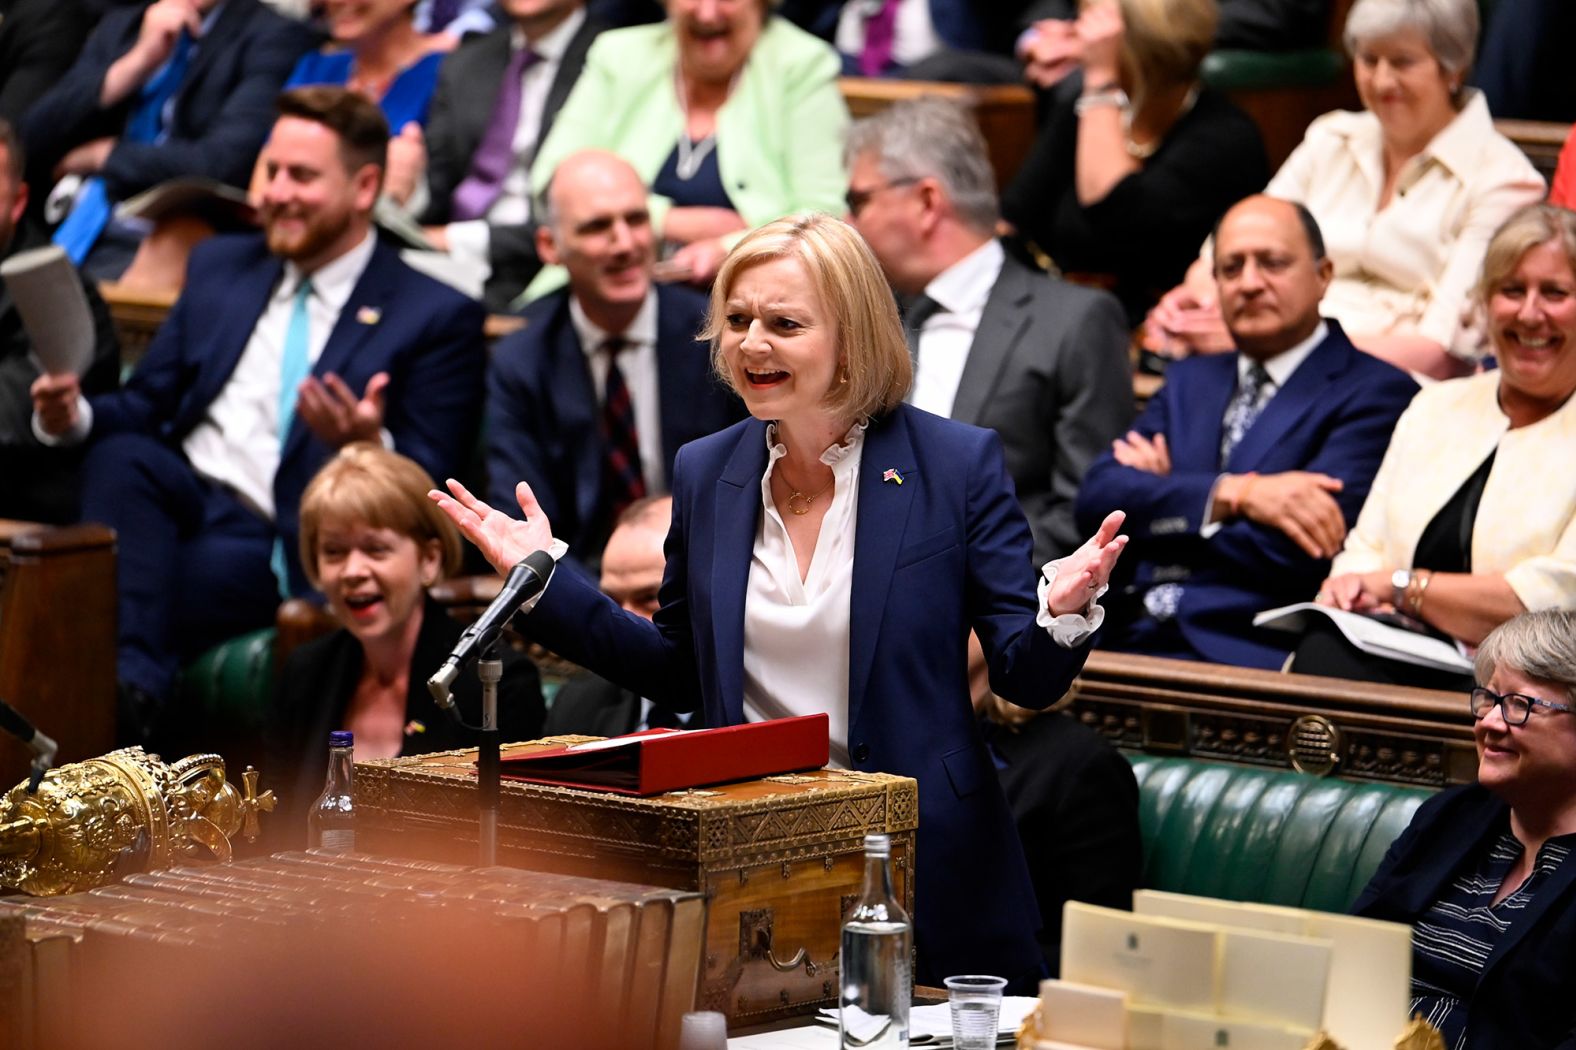 A day after becoming prime minister, Truss speaks during the Prime Minister's Questions at the House of Commons.